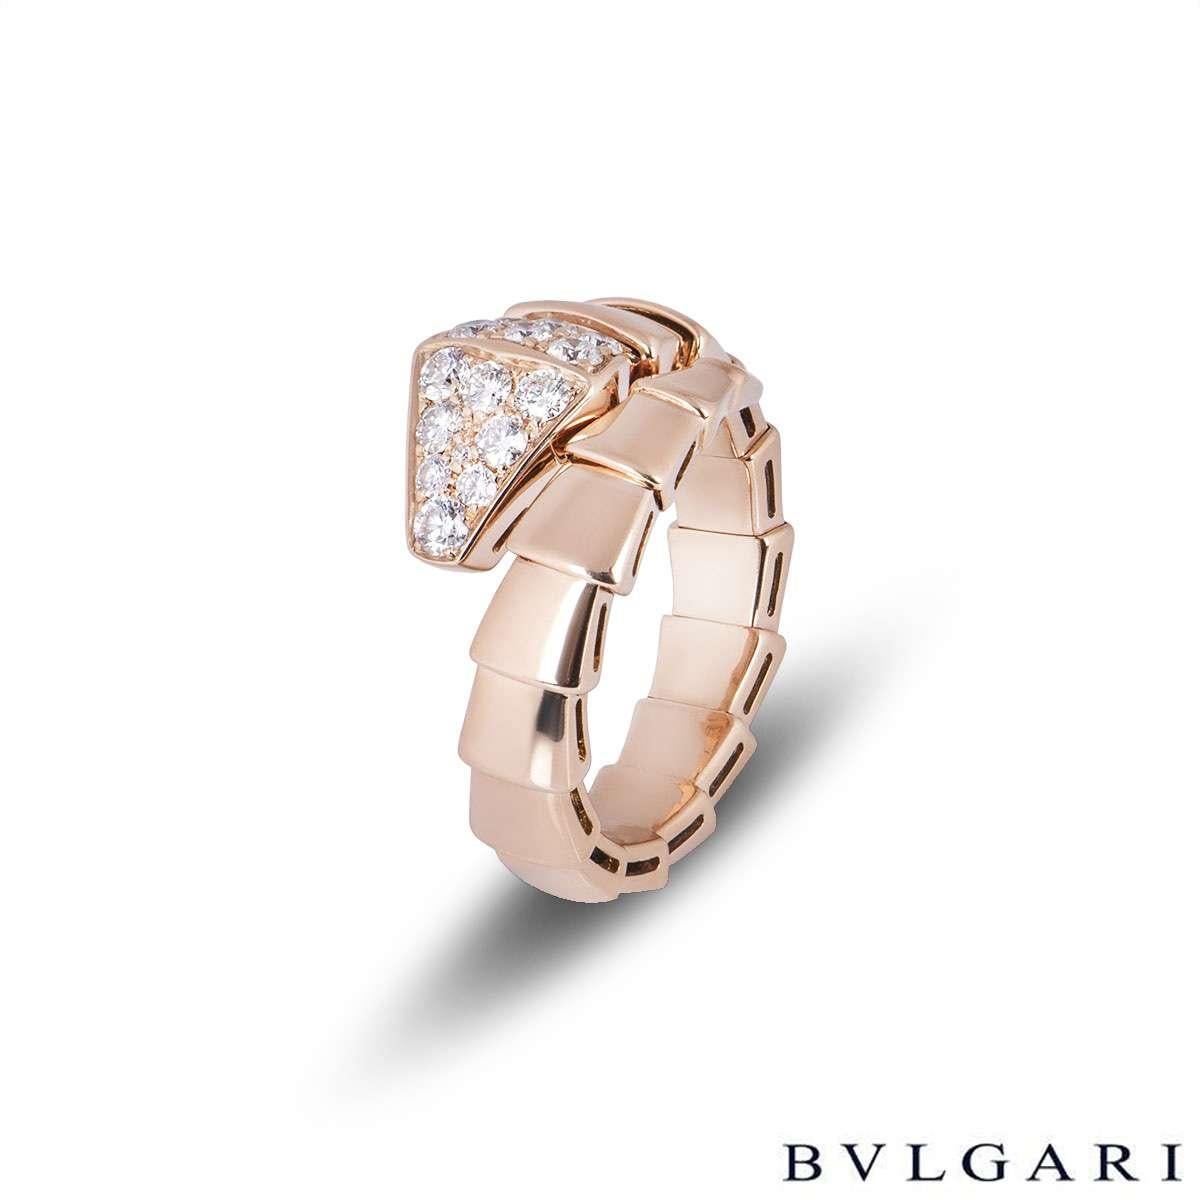 An 18k rose gold diamond ring by Bvlgari from the Serpenti collection. The ring is in the form of a serpent wrapping around the finger, comprising 17 graduating flexible intersections including the diamond set head of a snake. The head has 15 round